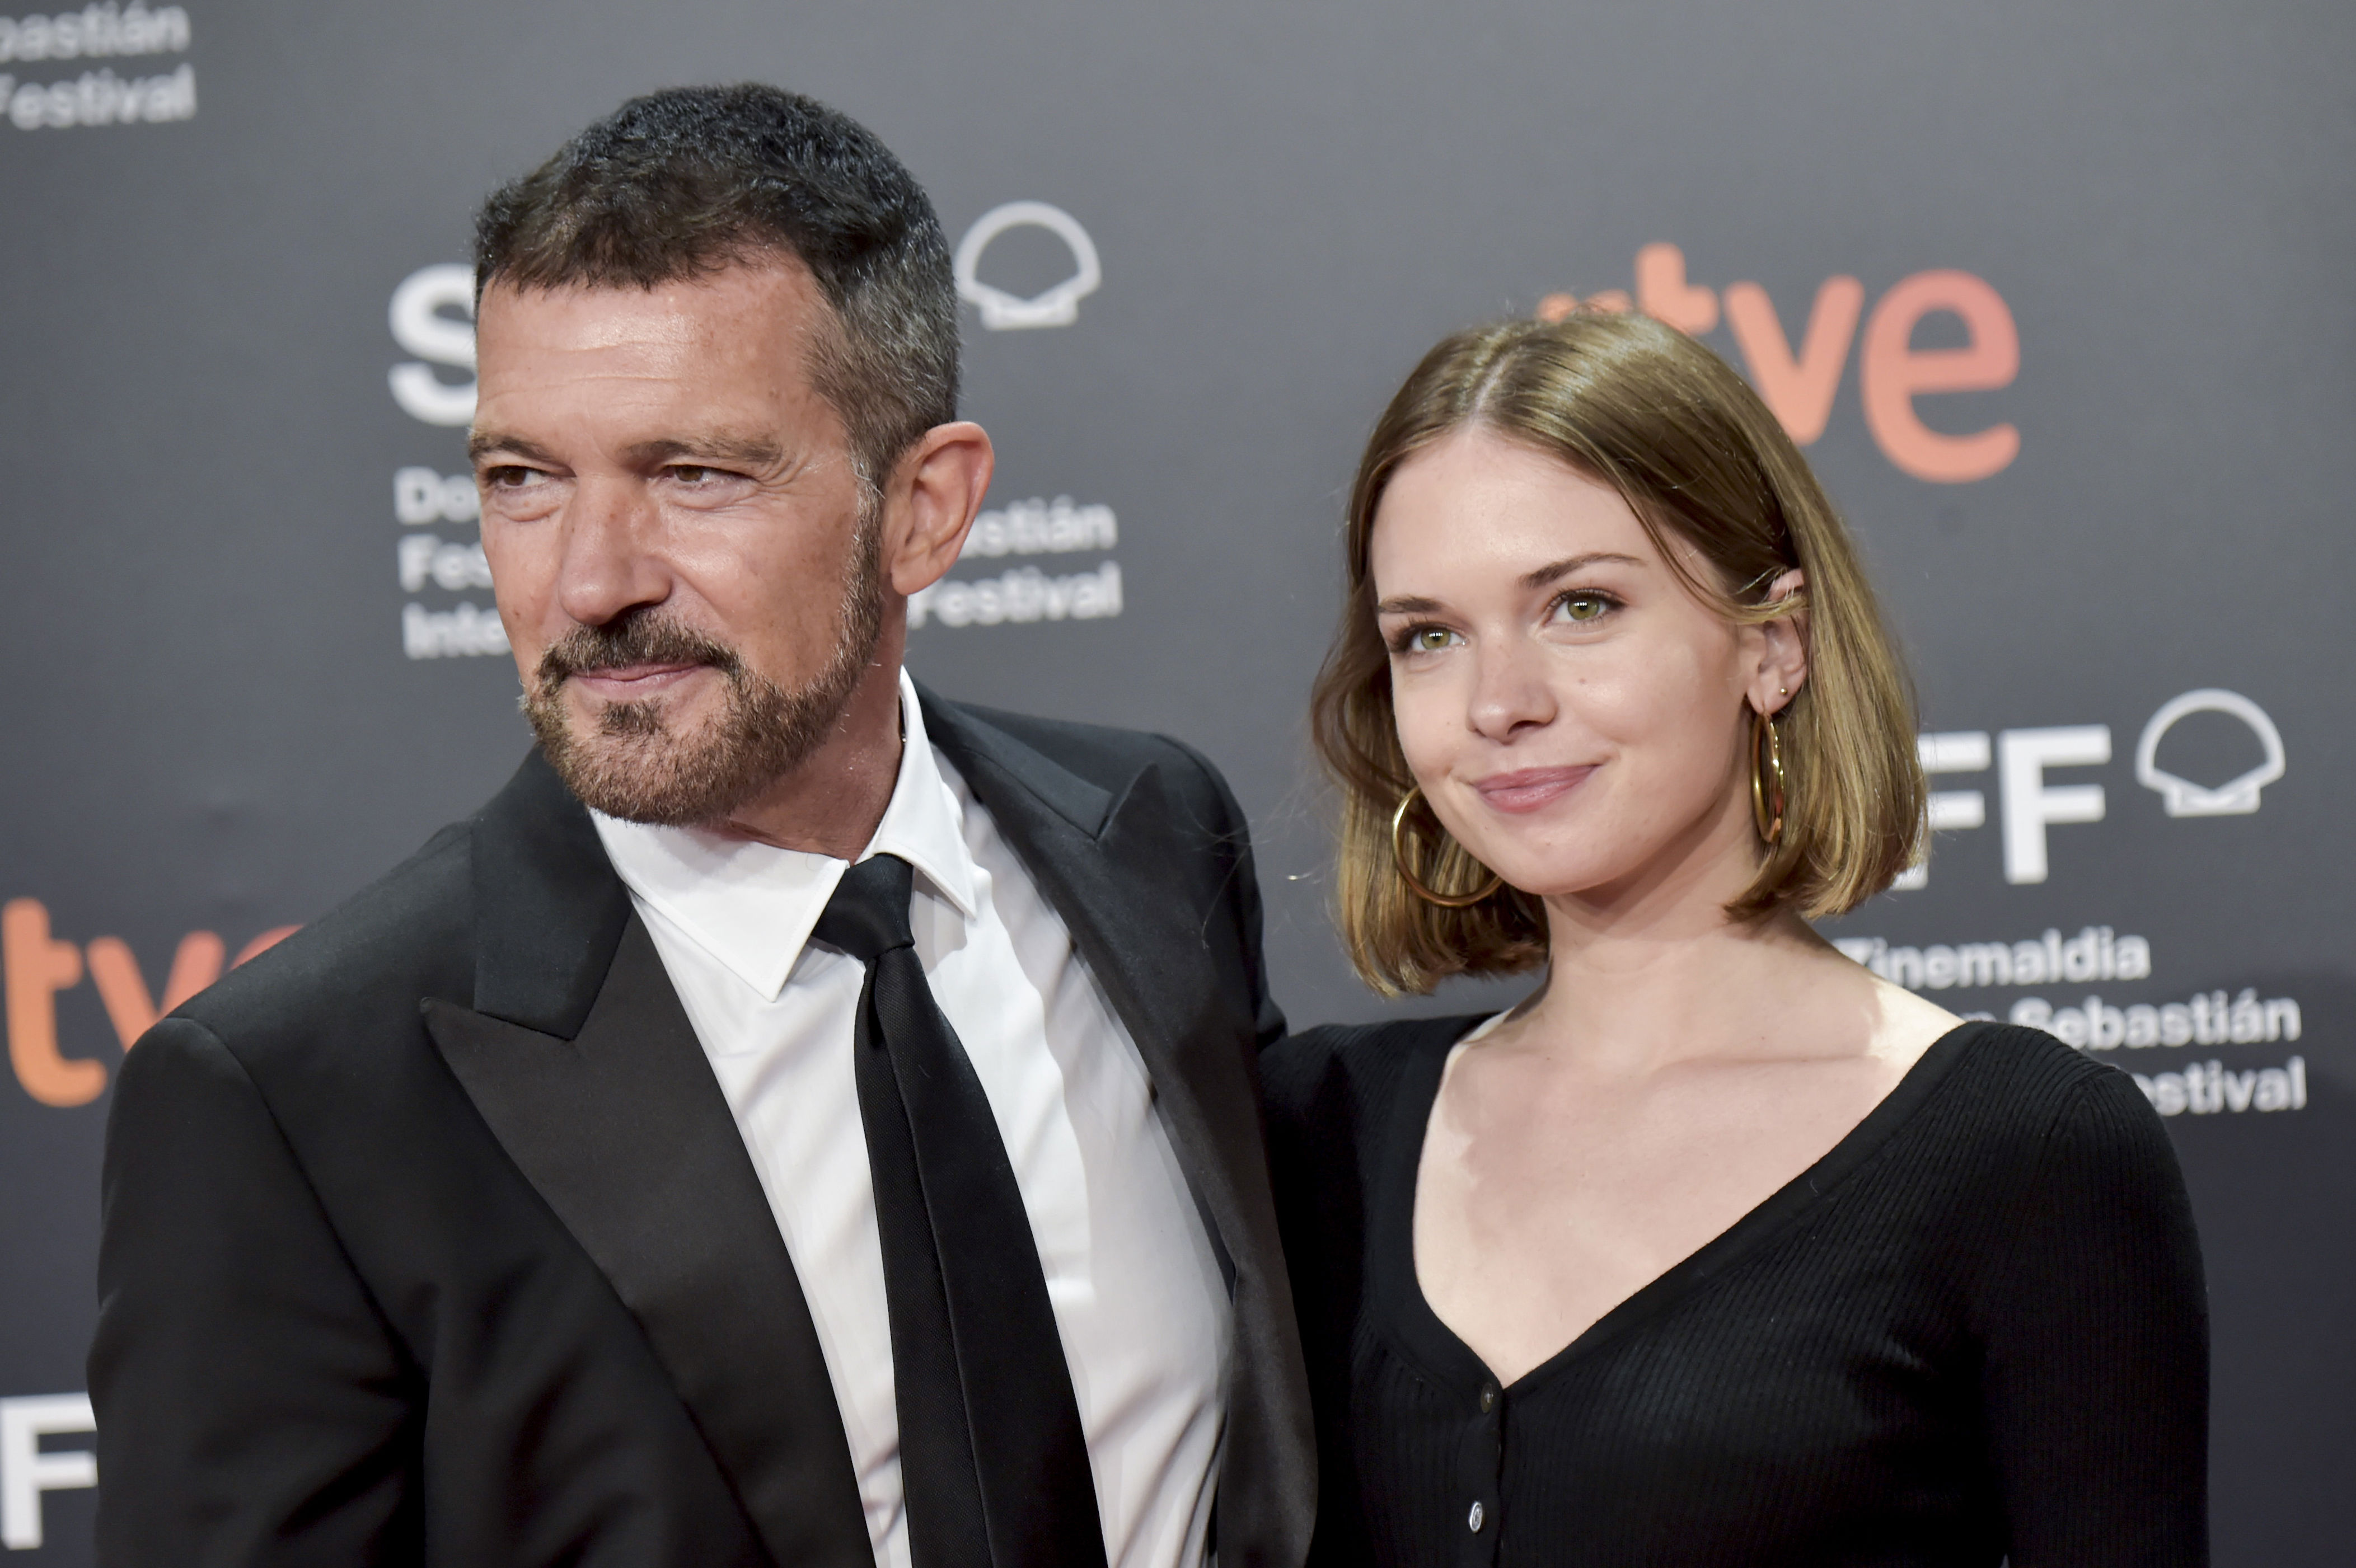 <p><a href="https://www.wonderwall.com/celebrity/profiles/overview/antonio-banderas-1193.article">Antonio Banderas</a> and daughter Stella del Carmen Banderas (who was born in 1996) attended the <span>69th San Sebastian Film Festival in Spain together on Sept. 17, 2021.</span></p>